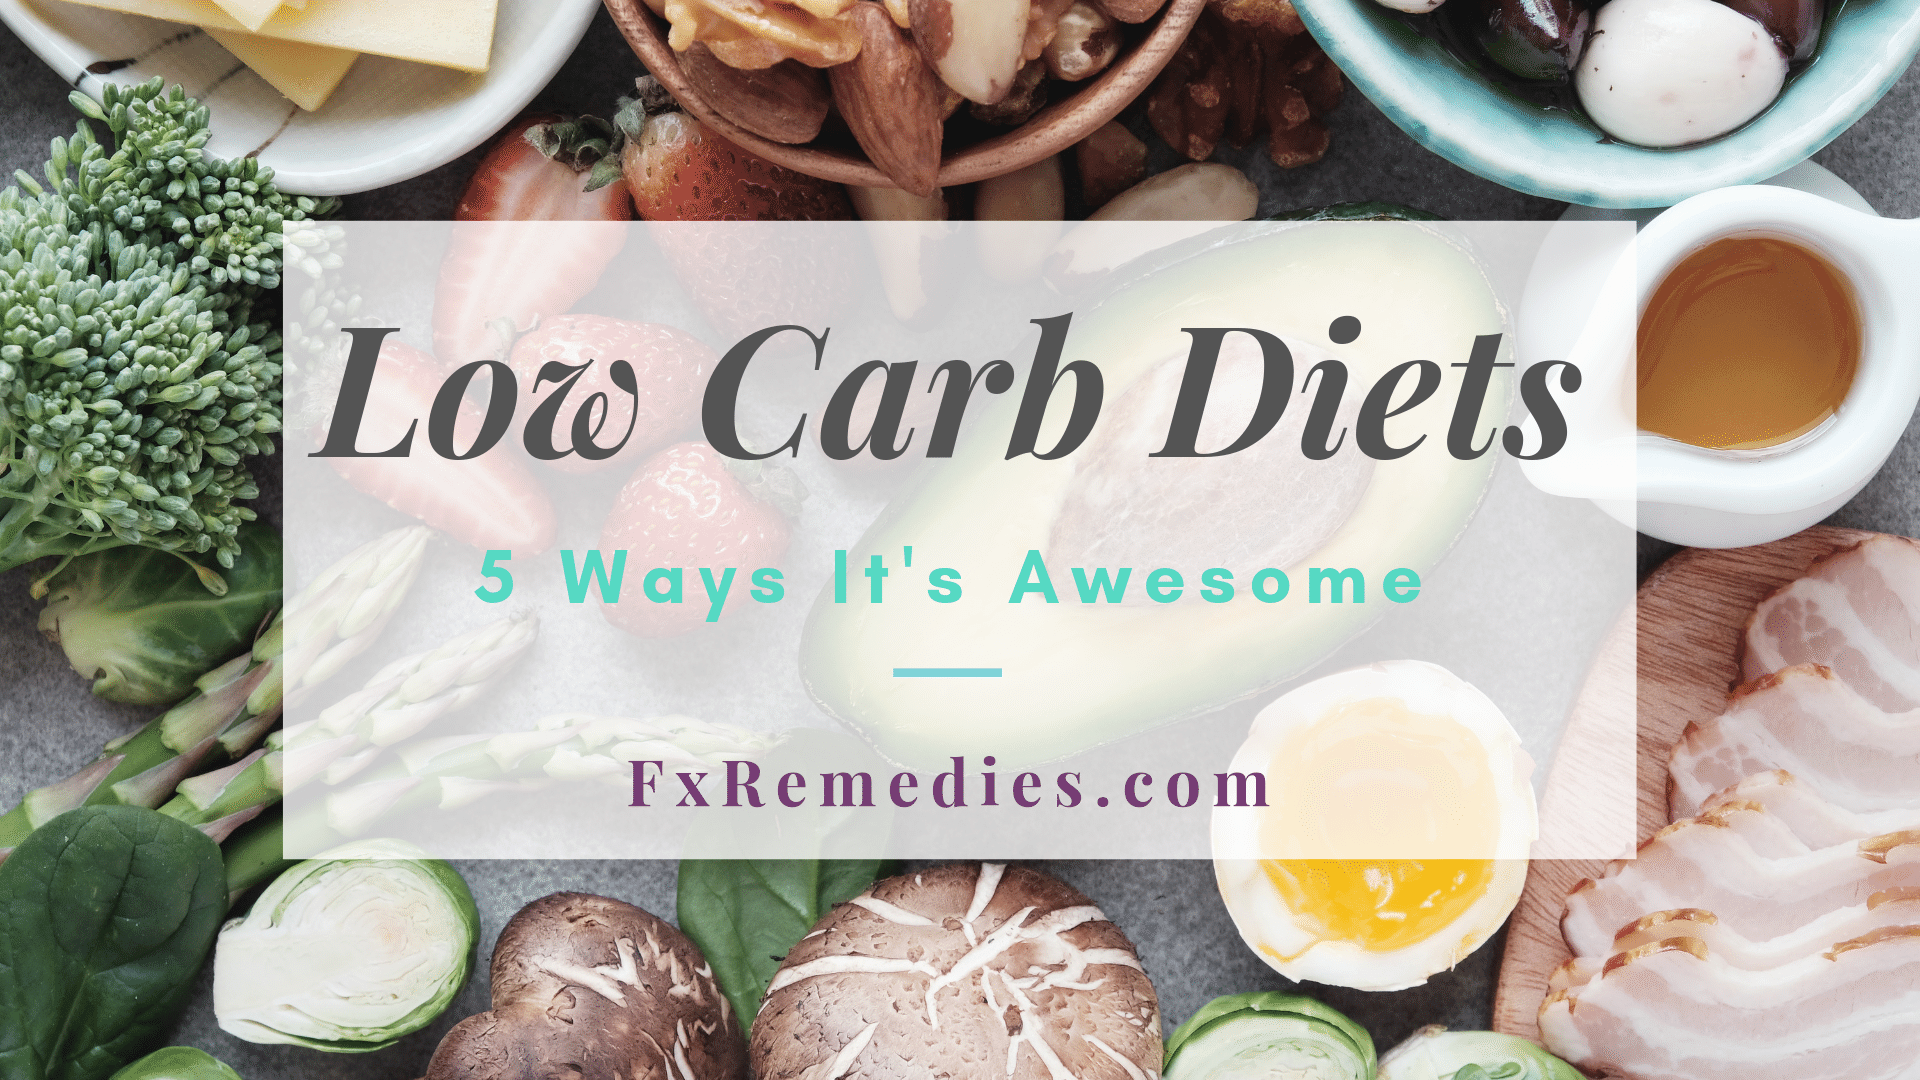 If you’re hoping to get healthier and lose weight, a low carb diet can be the perfect solution. However, due to bad press caused by fad low-carb diets, many pe